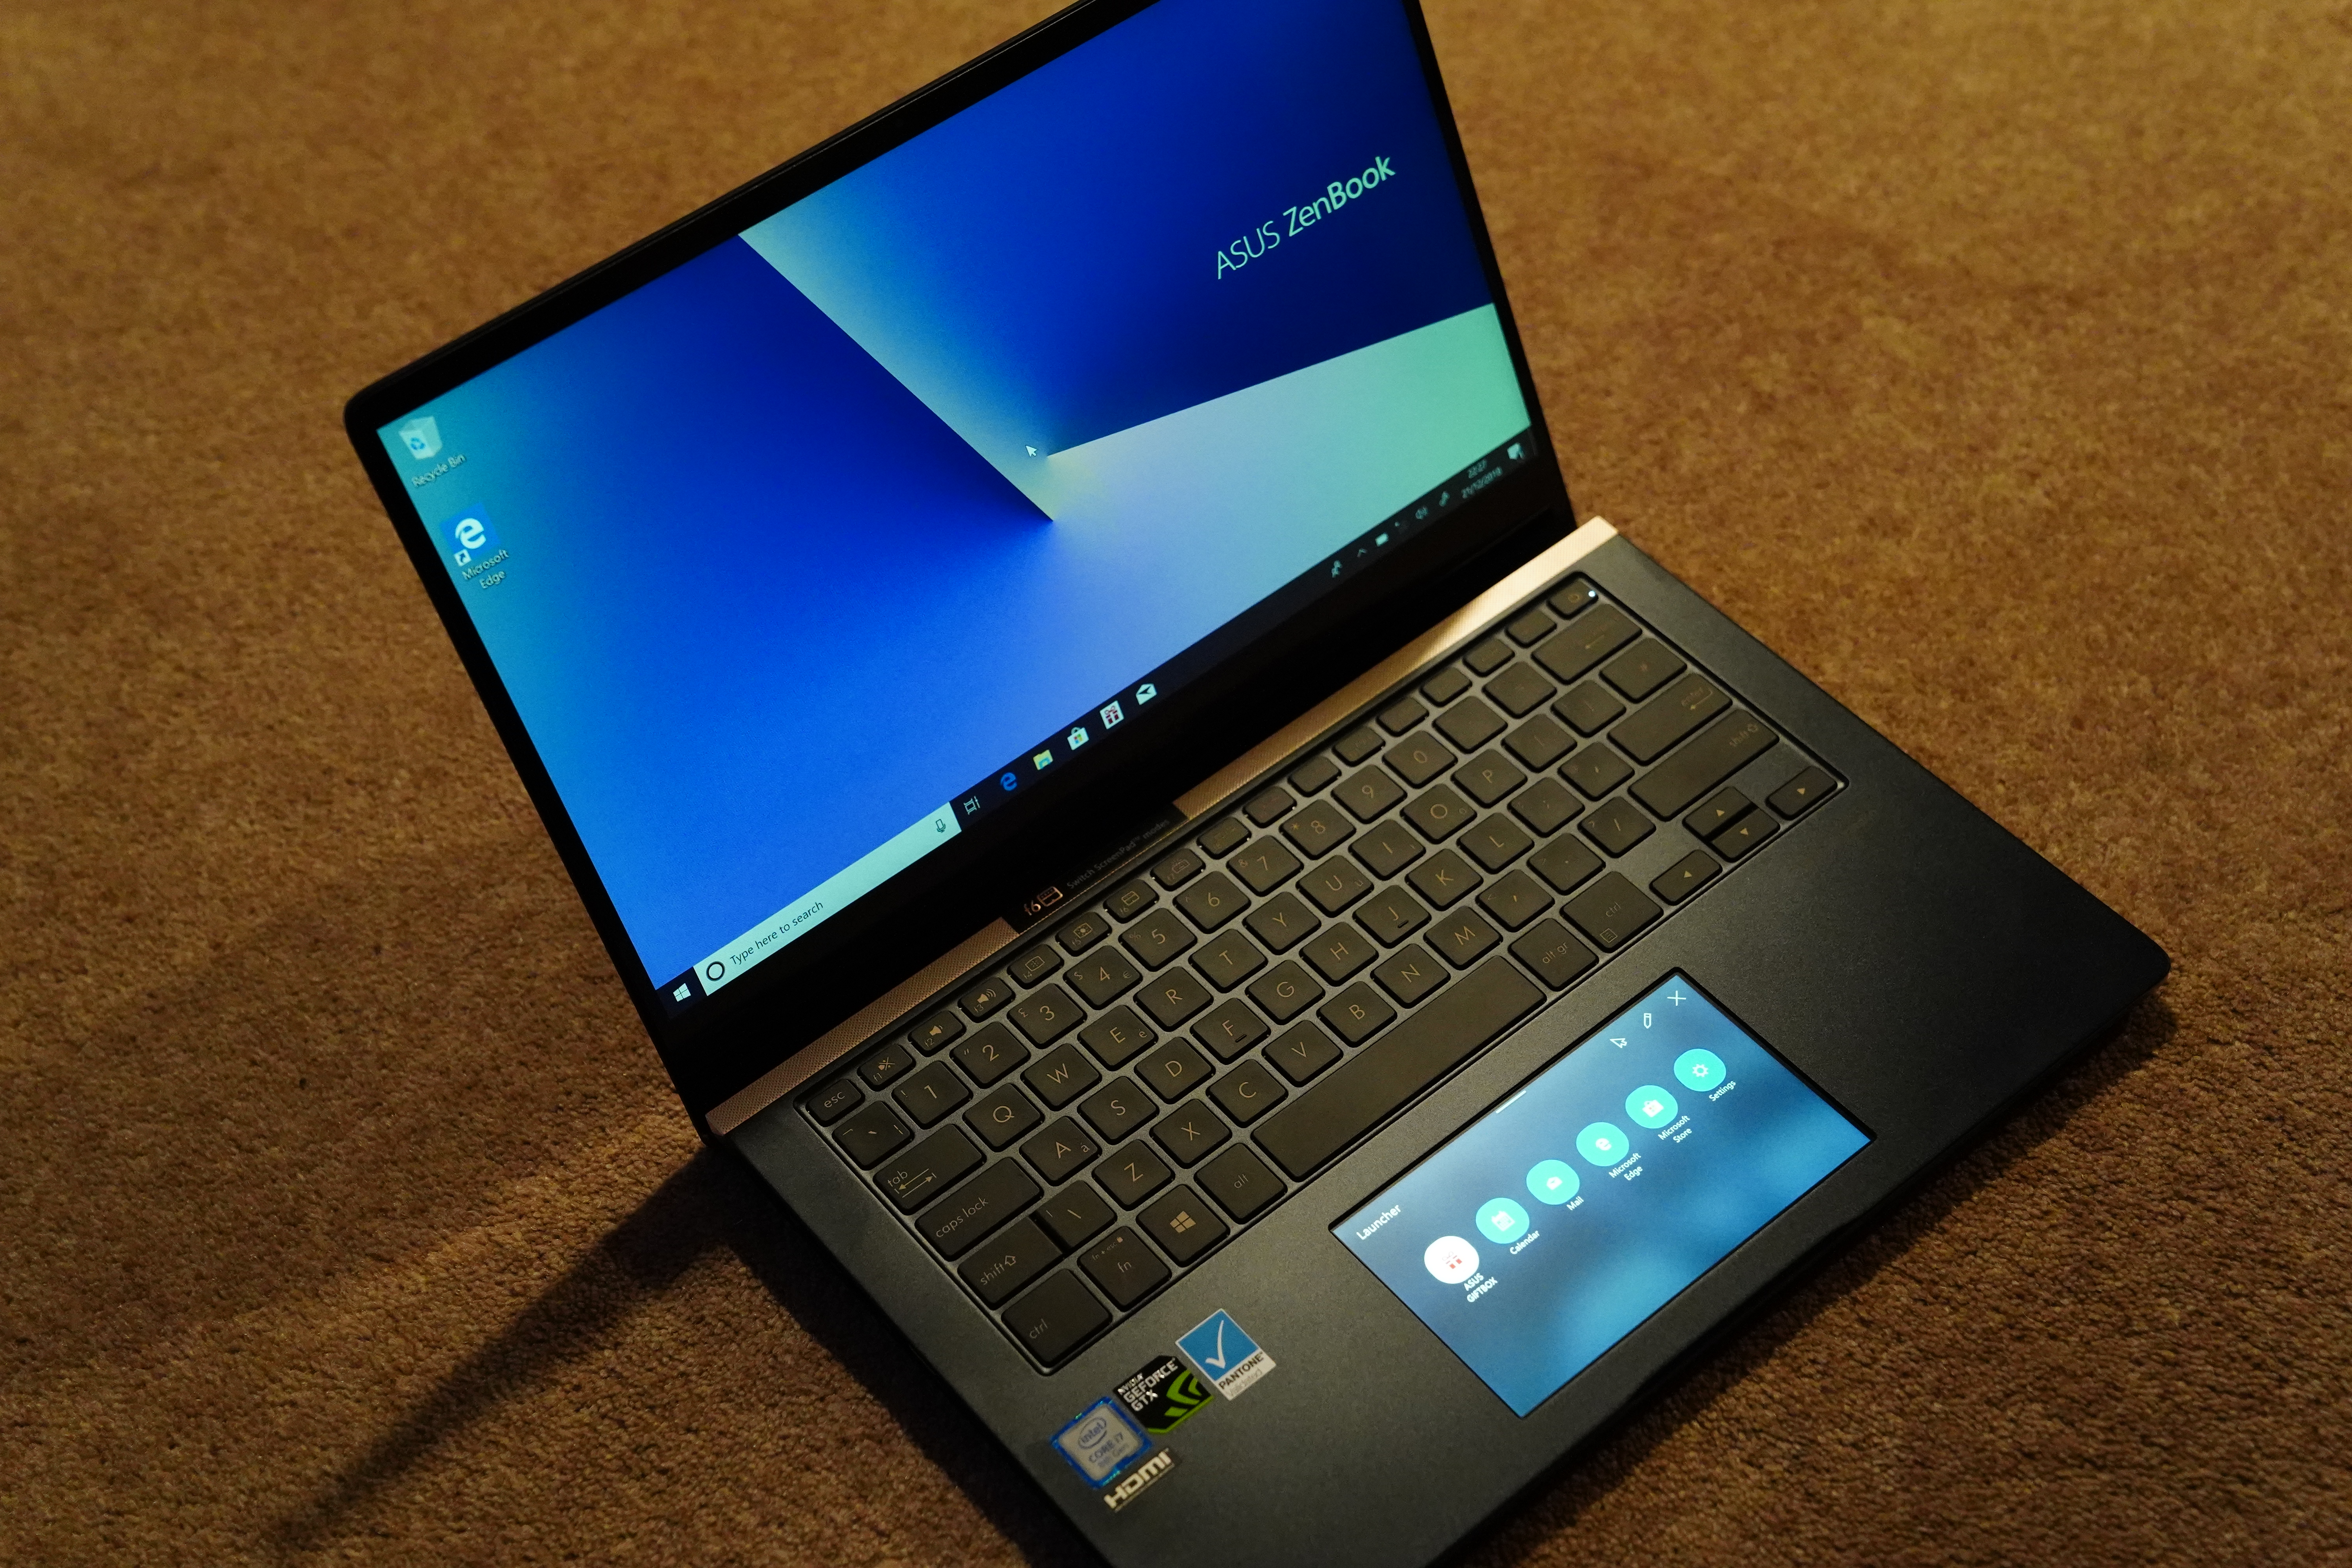 Treat yourself this new year with the ASUS Zenbook Pro